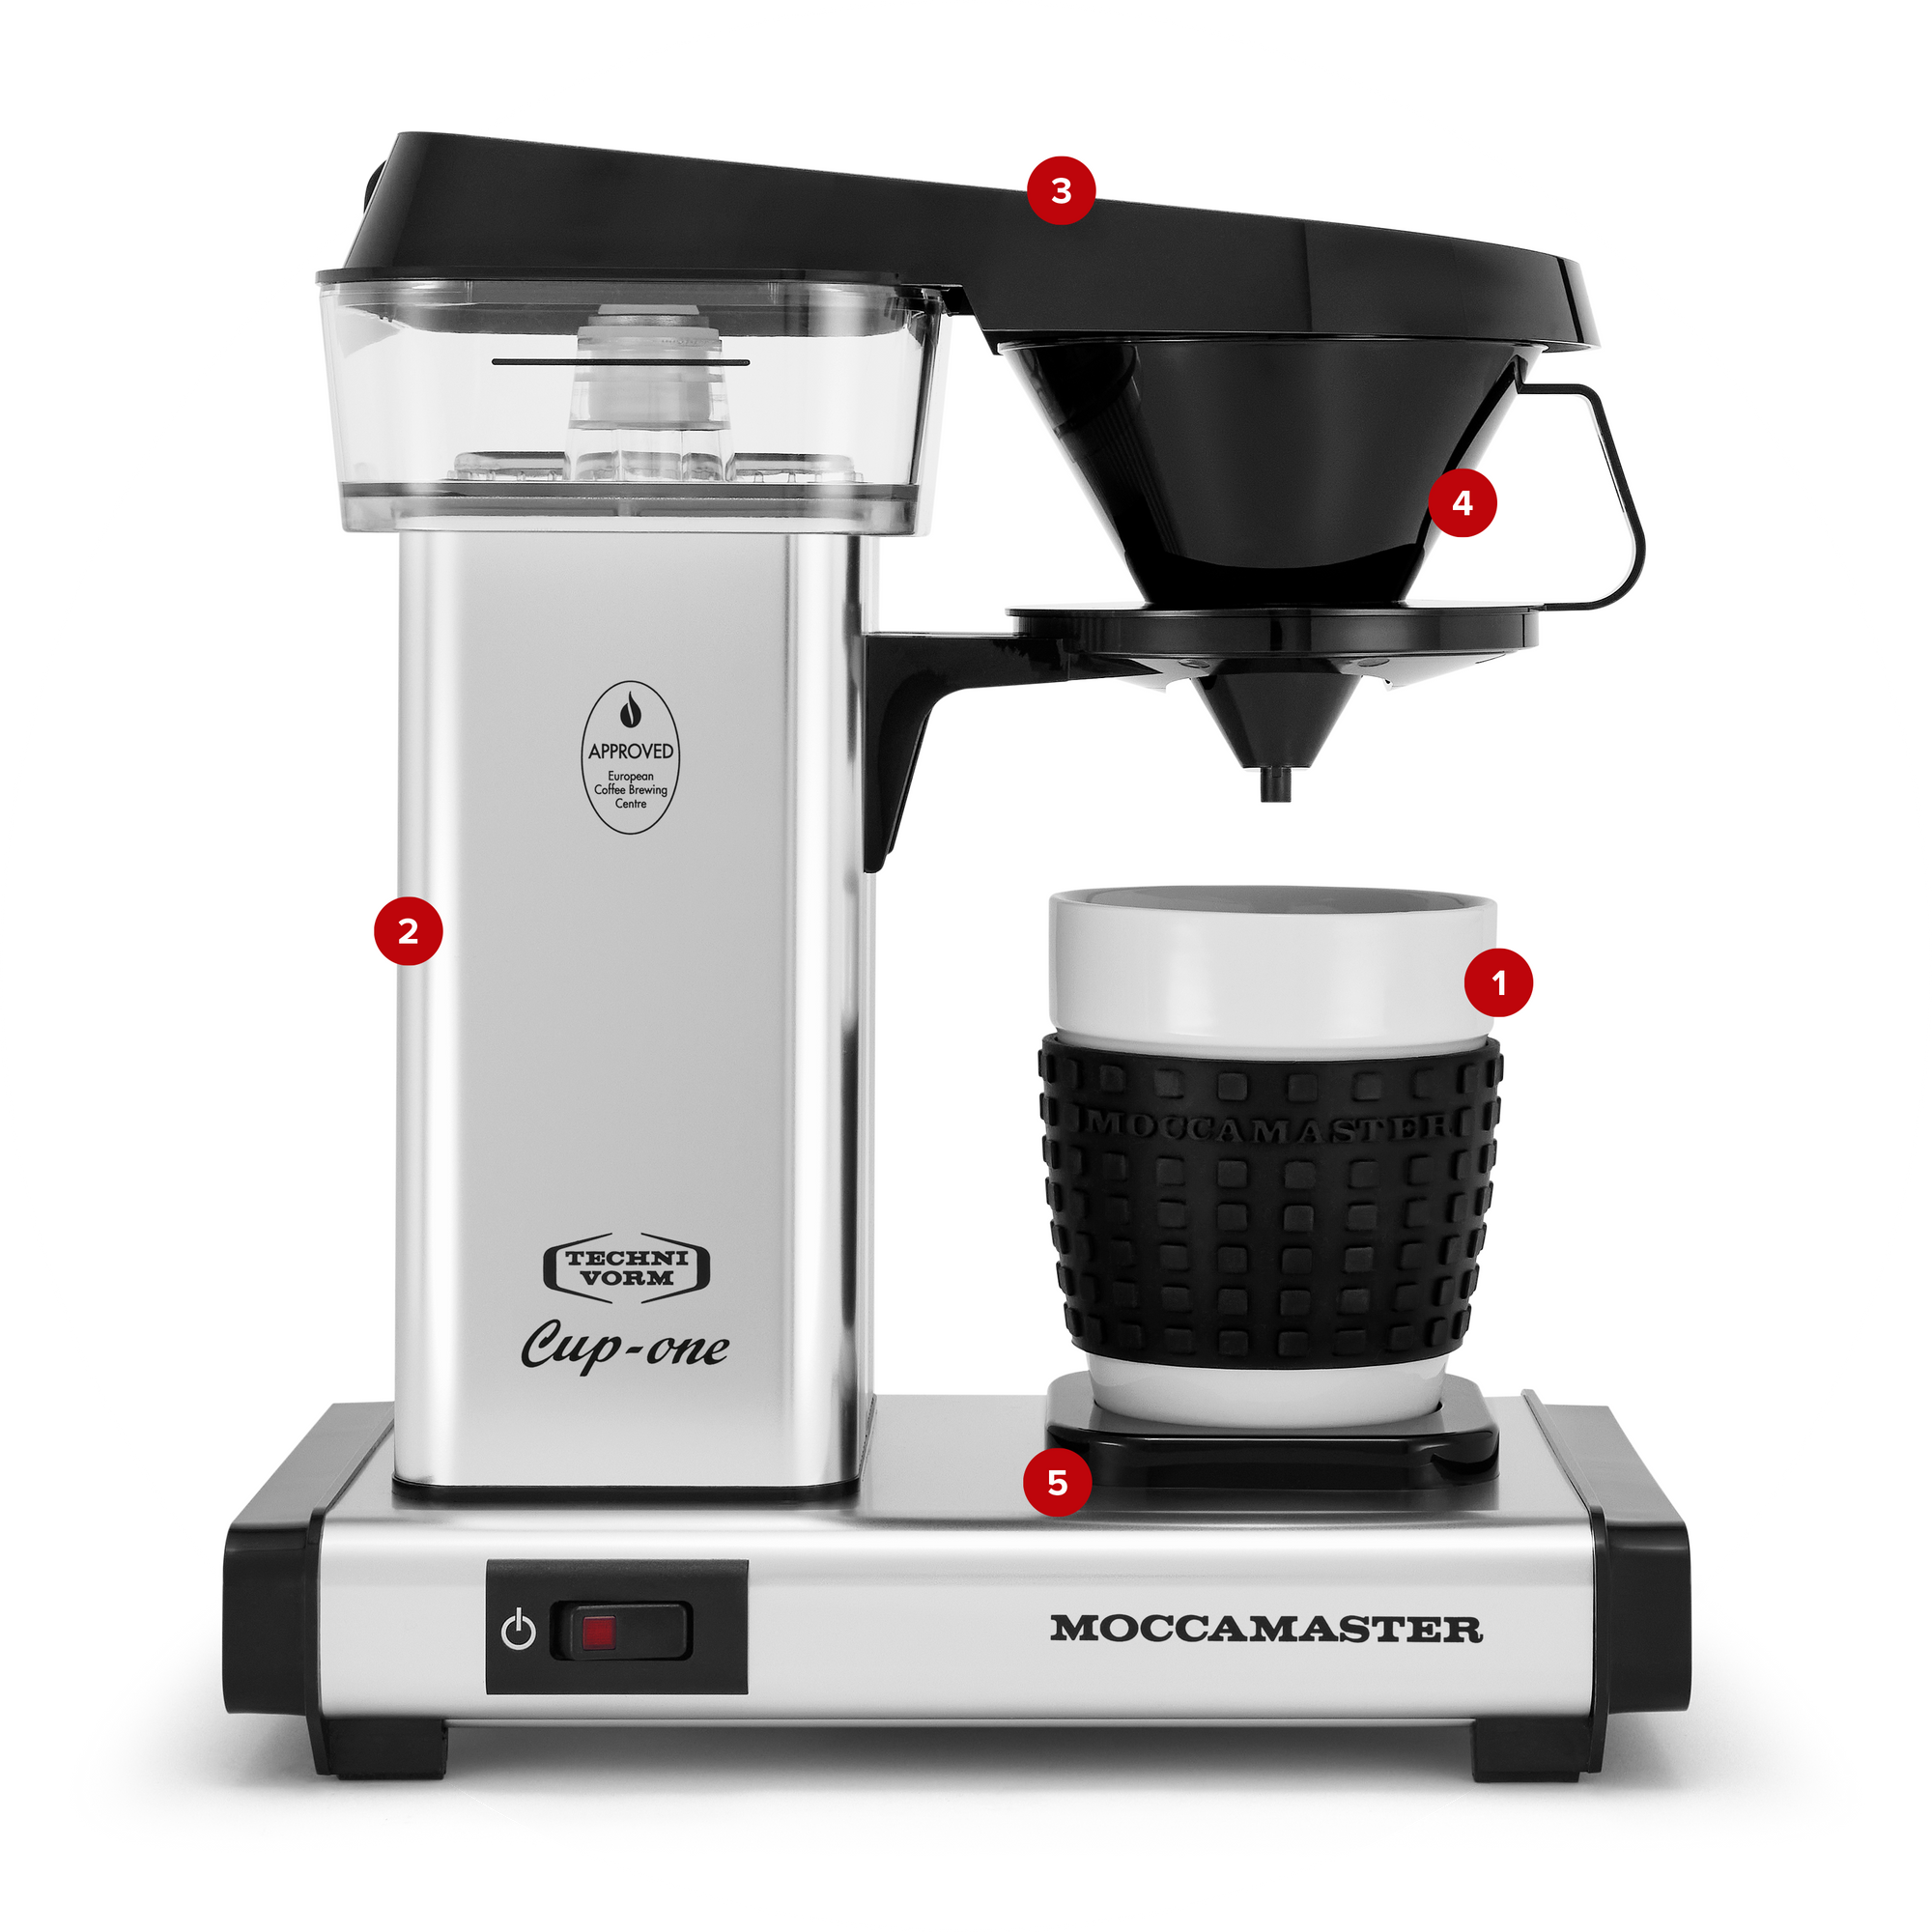 Moccamaster Cup-One coffee brewer